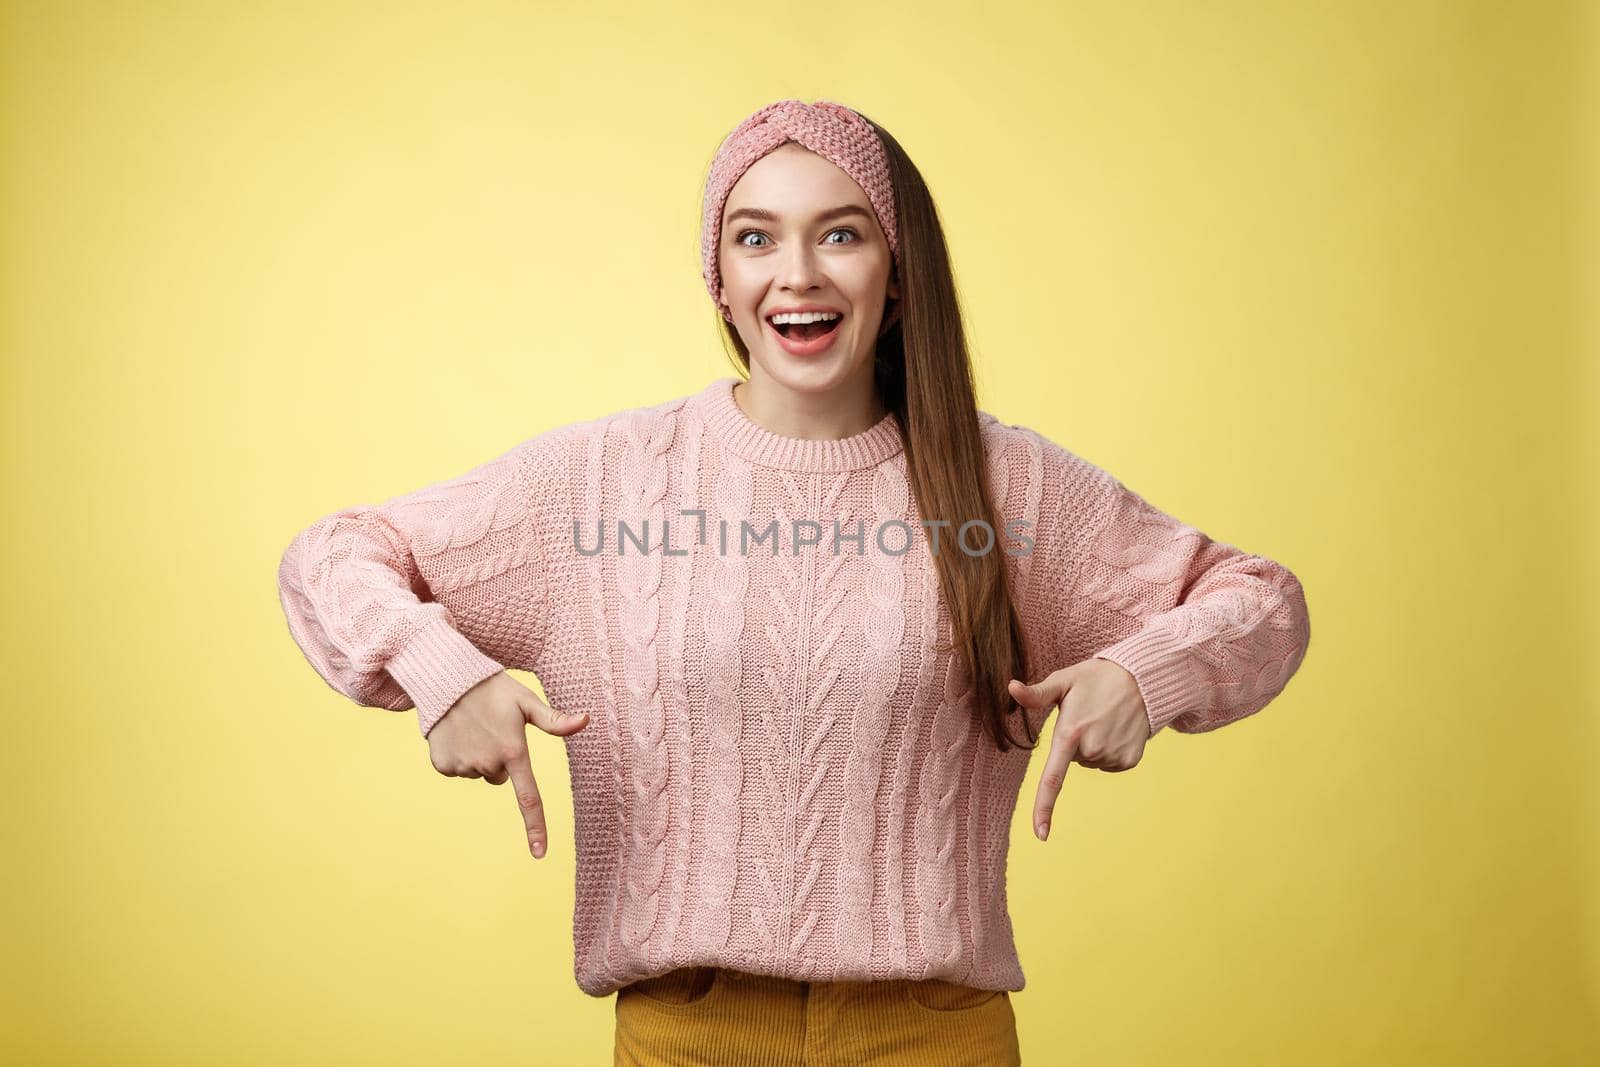 Lifestyle. Euphoric attractive young trendy girl in knitted band wearing sweater grinning excited enthusiastic pointing down thrilled of awesome promotion standing amused and overwhelmed over yellow background.